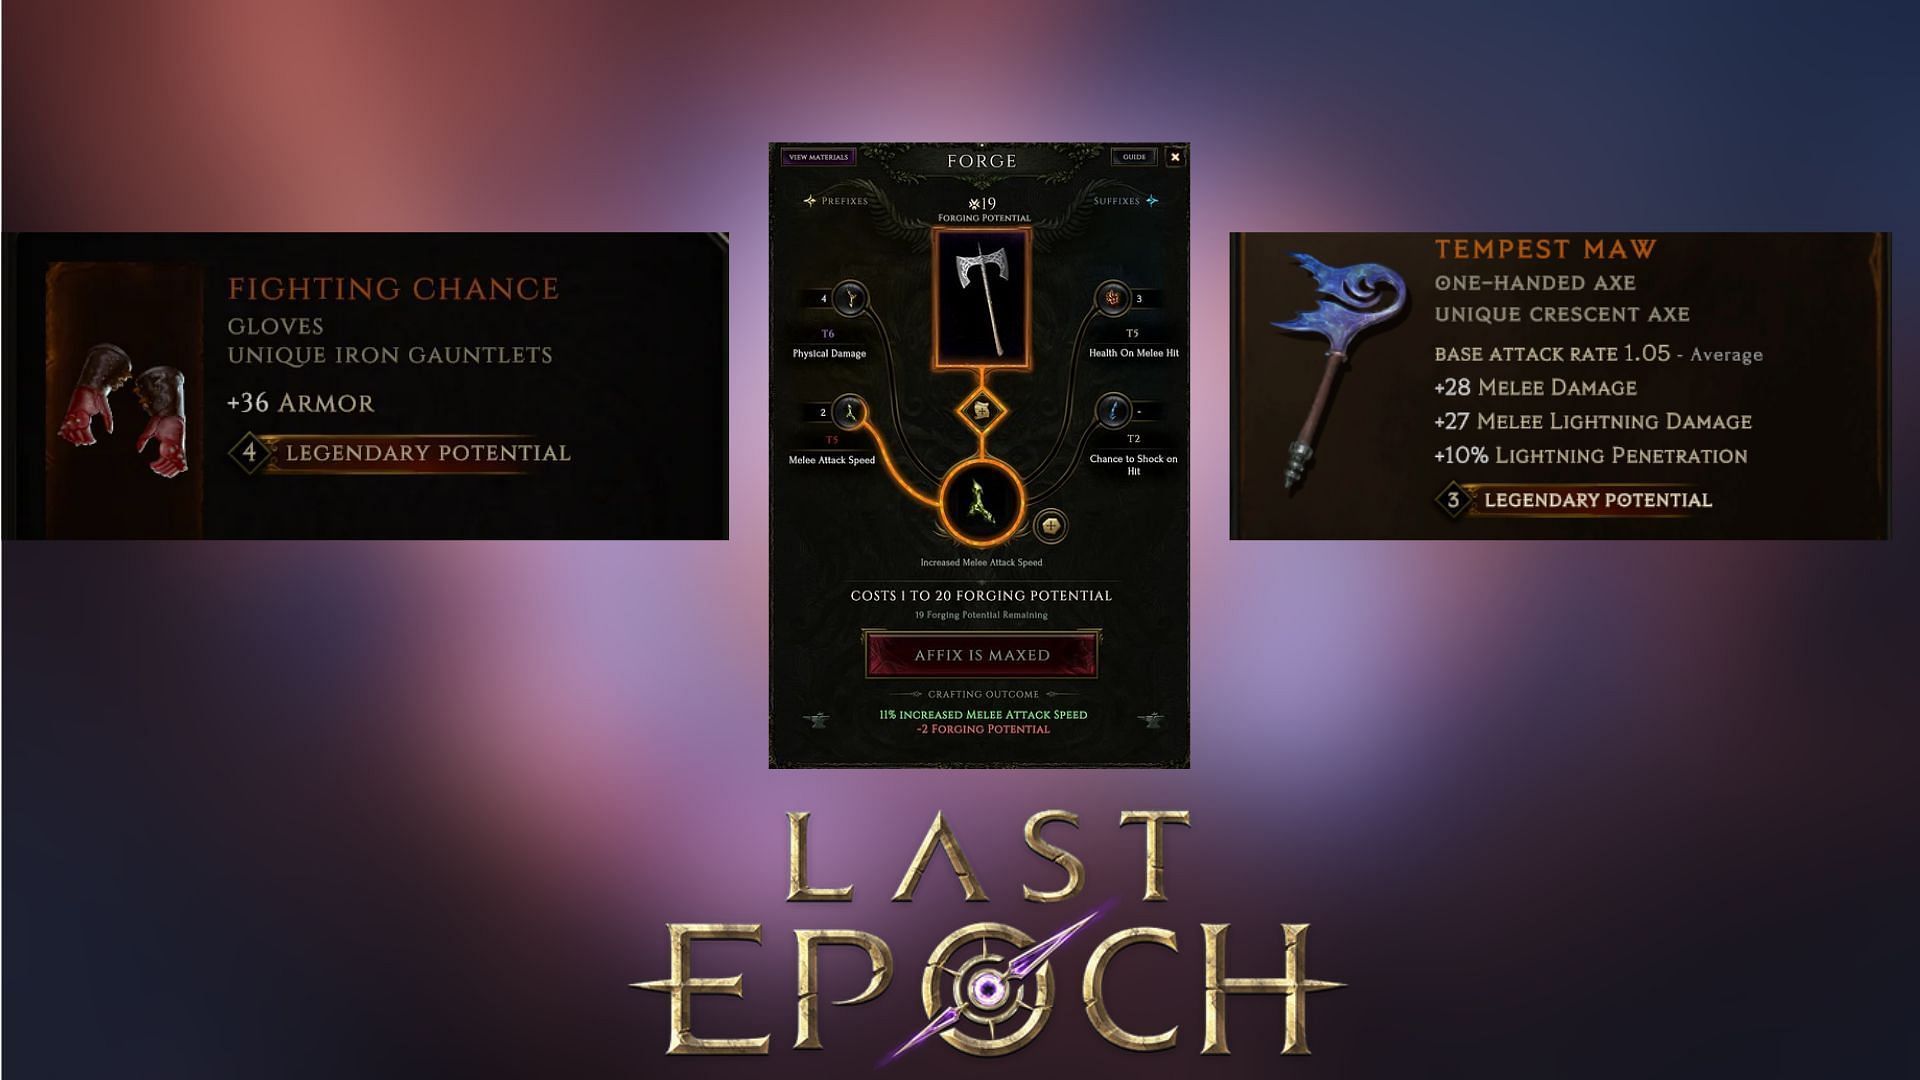 Forging Potential in Last Epoch determines the amount of time an item can be crafted